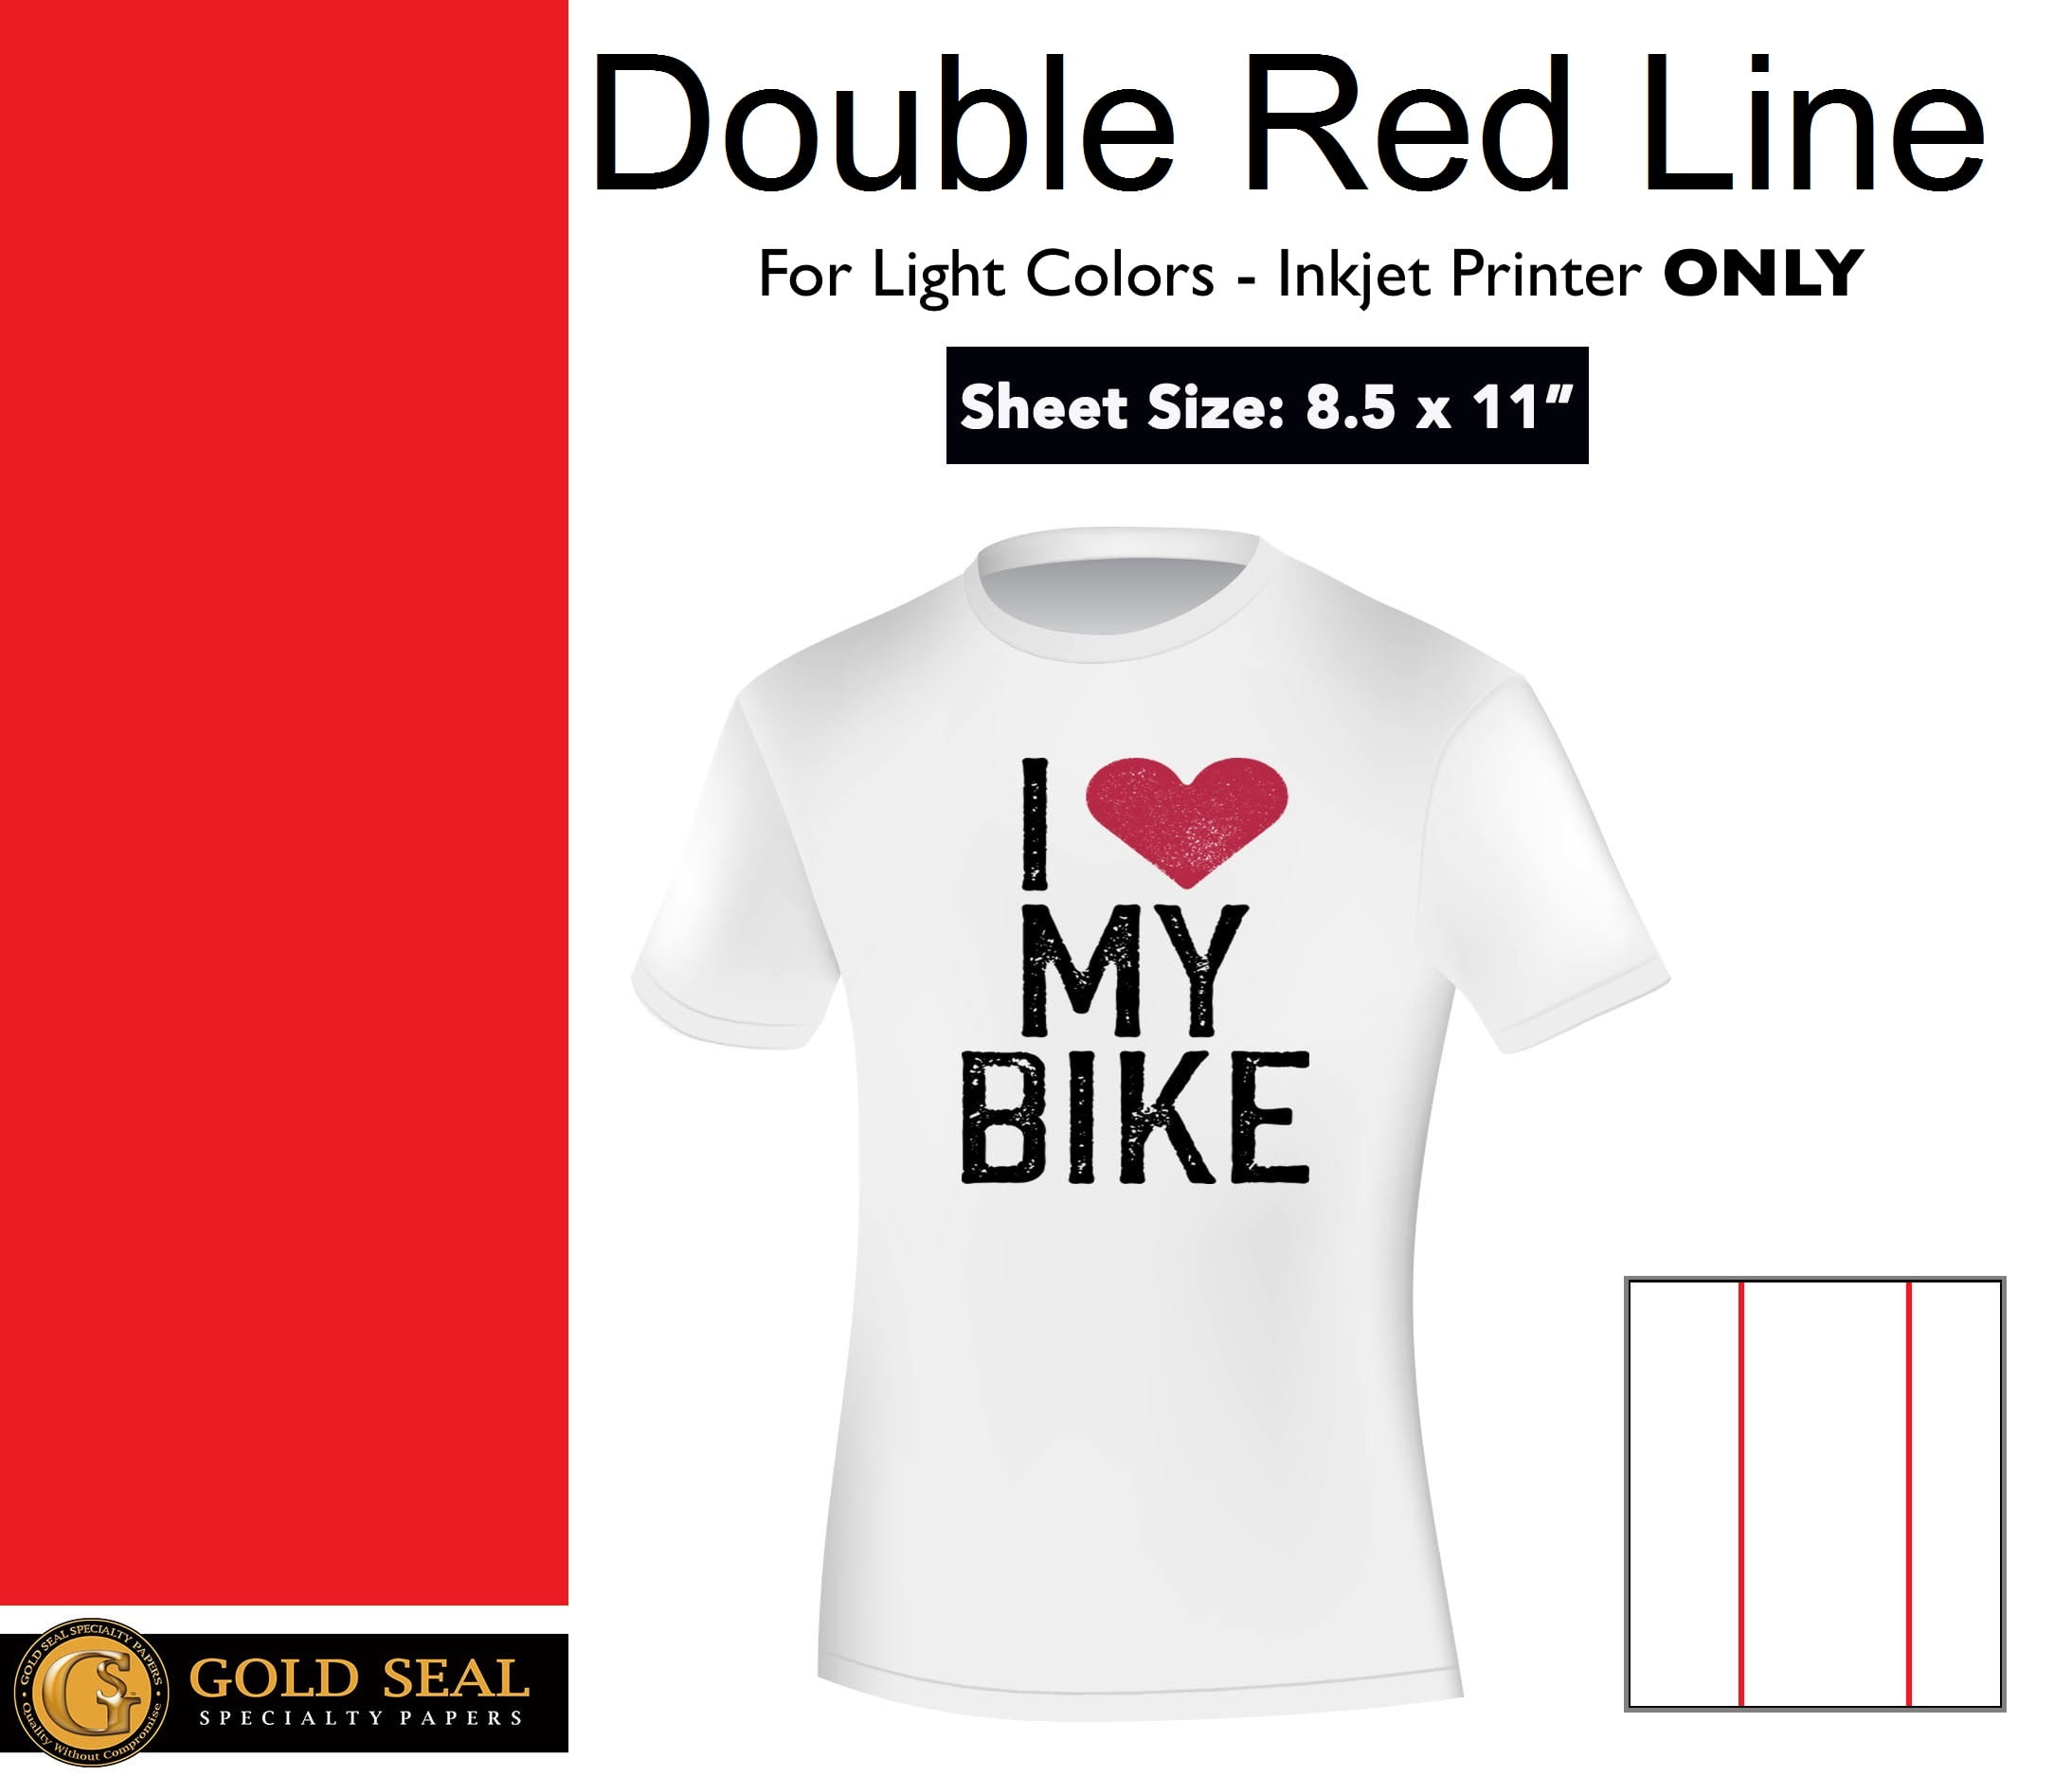 50 sheets Red Grid Inkjet Light Colored T Shirt Heat Transfer Paper 8.5x11 